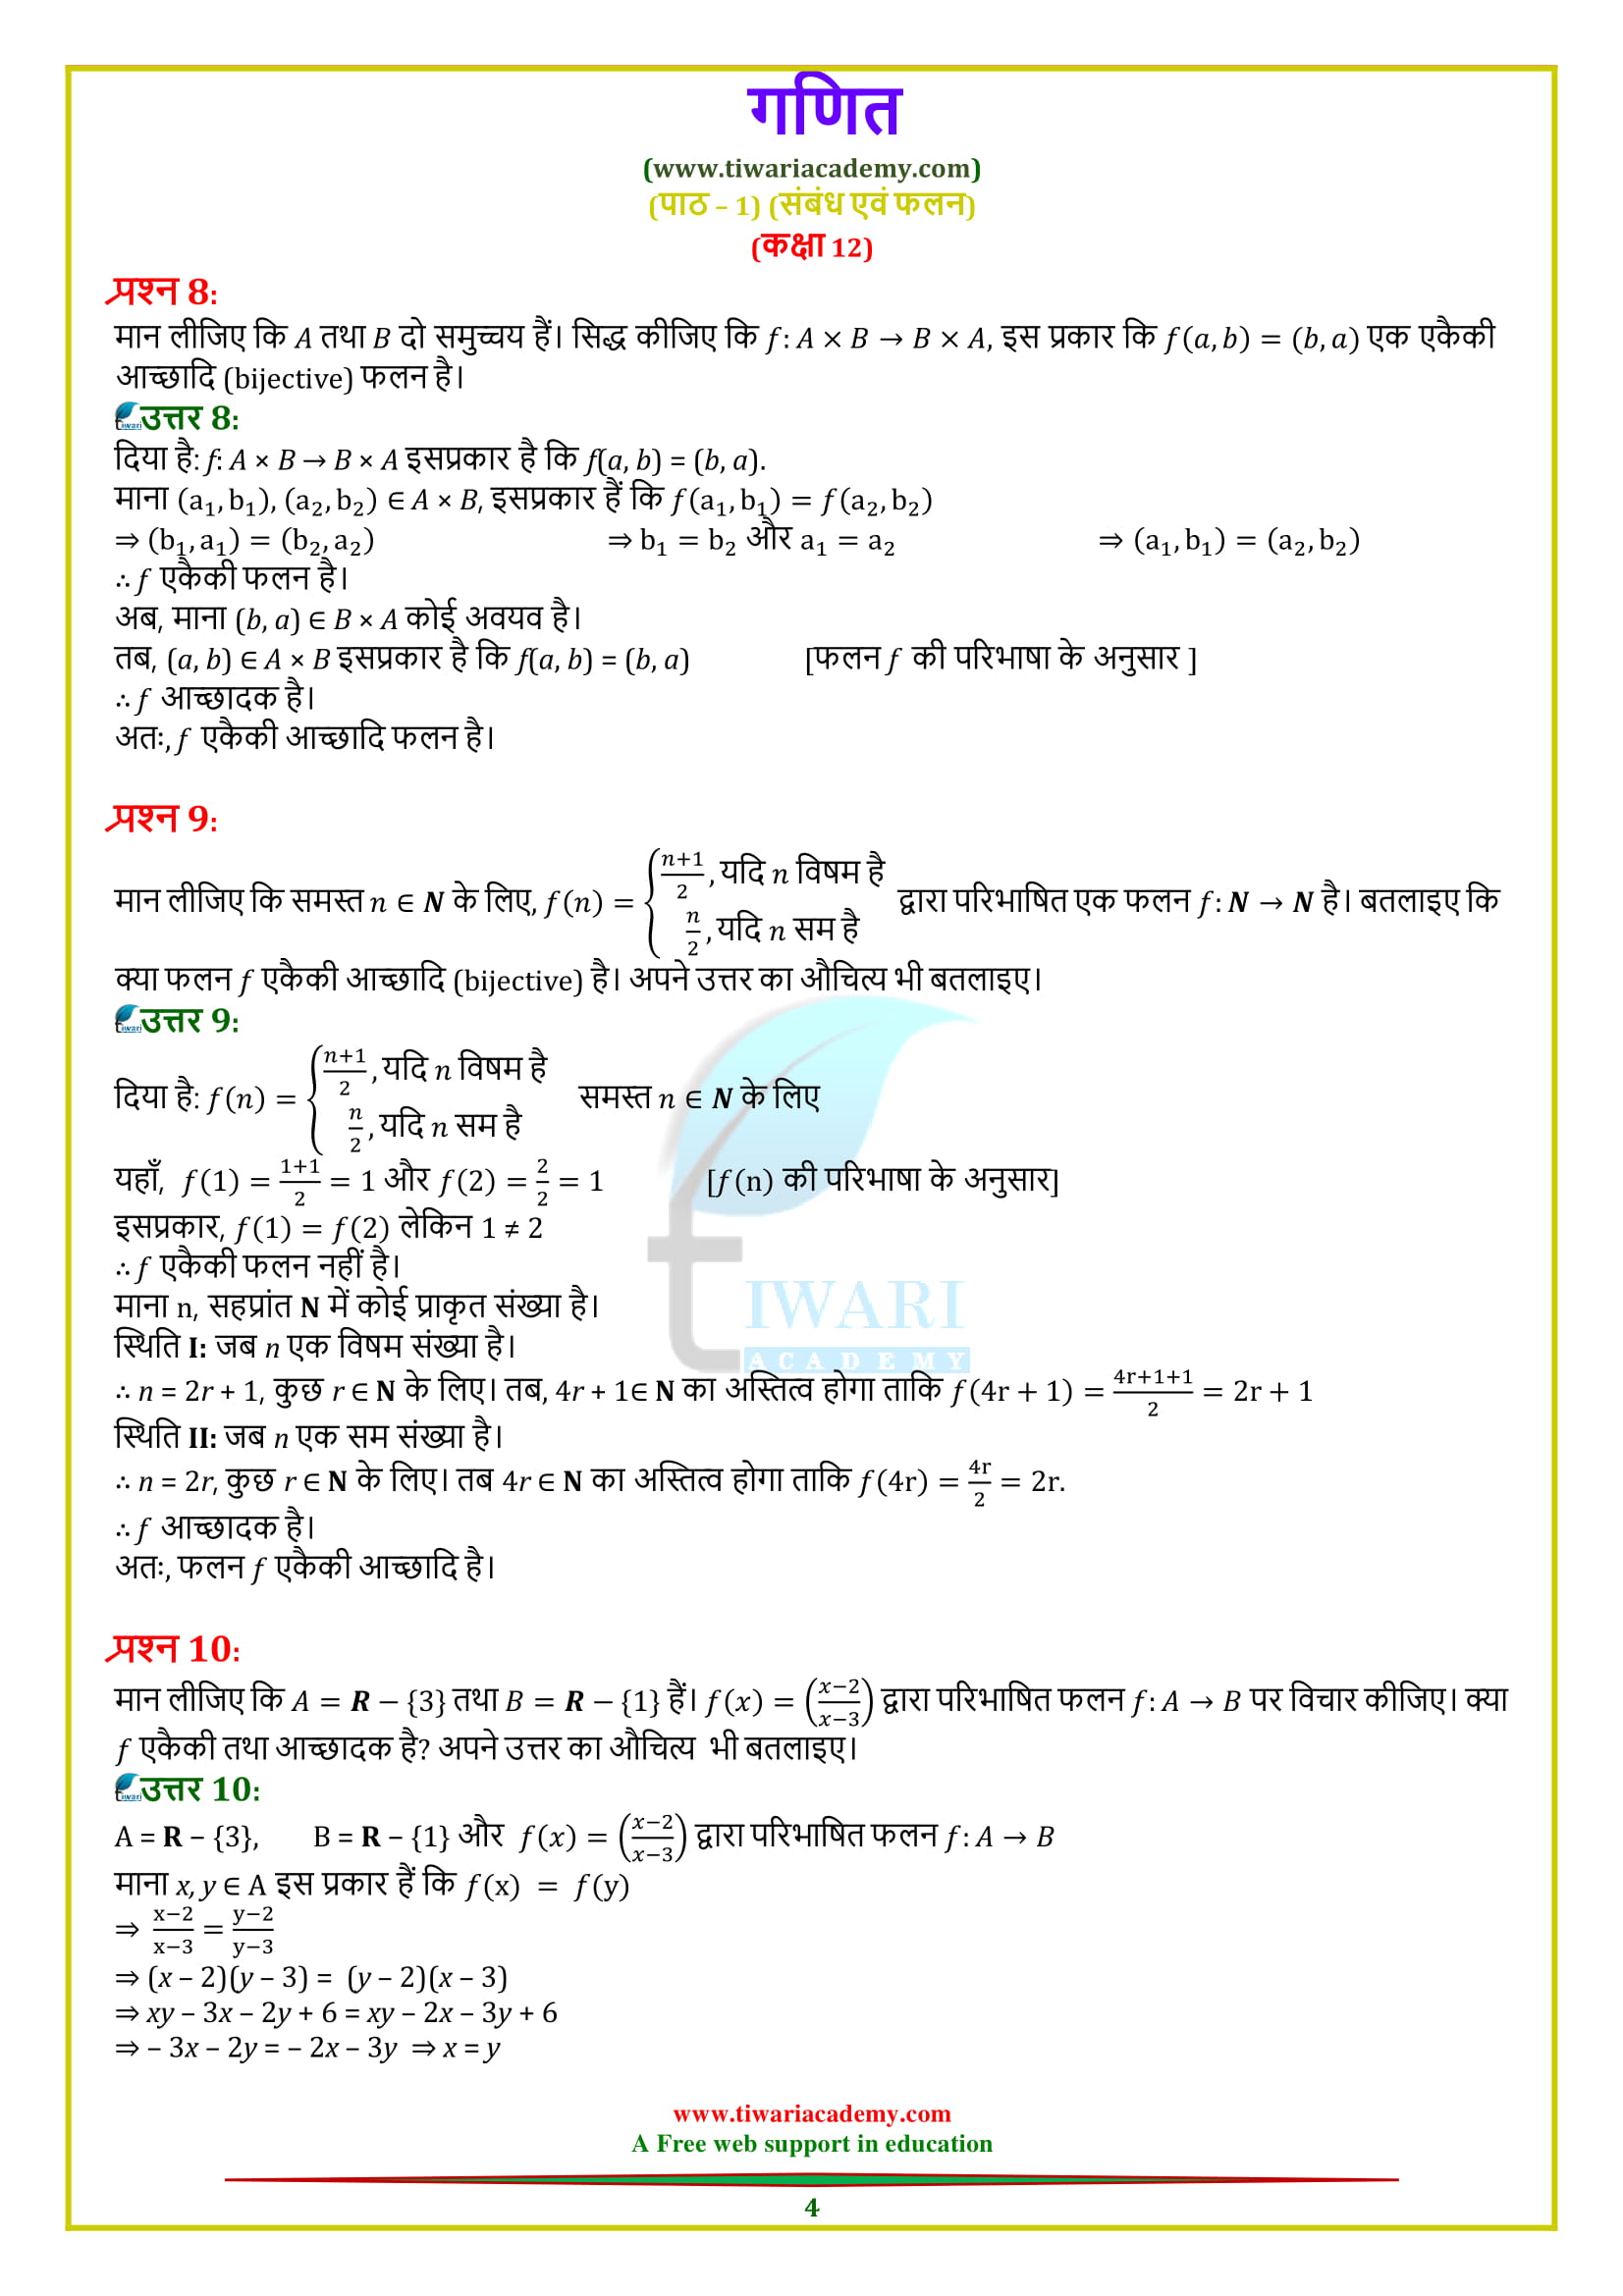 NCERT Solutions for Class 12 Maths Chapter 1 Exercise 1.2 for MP Board students as well up board.